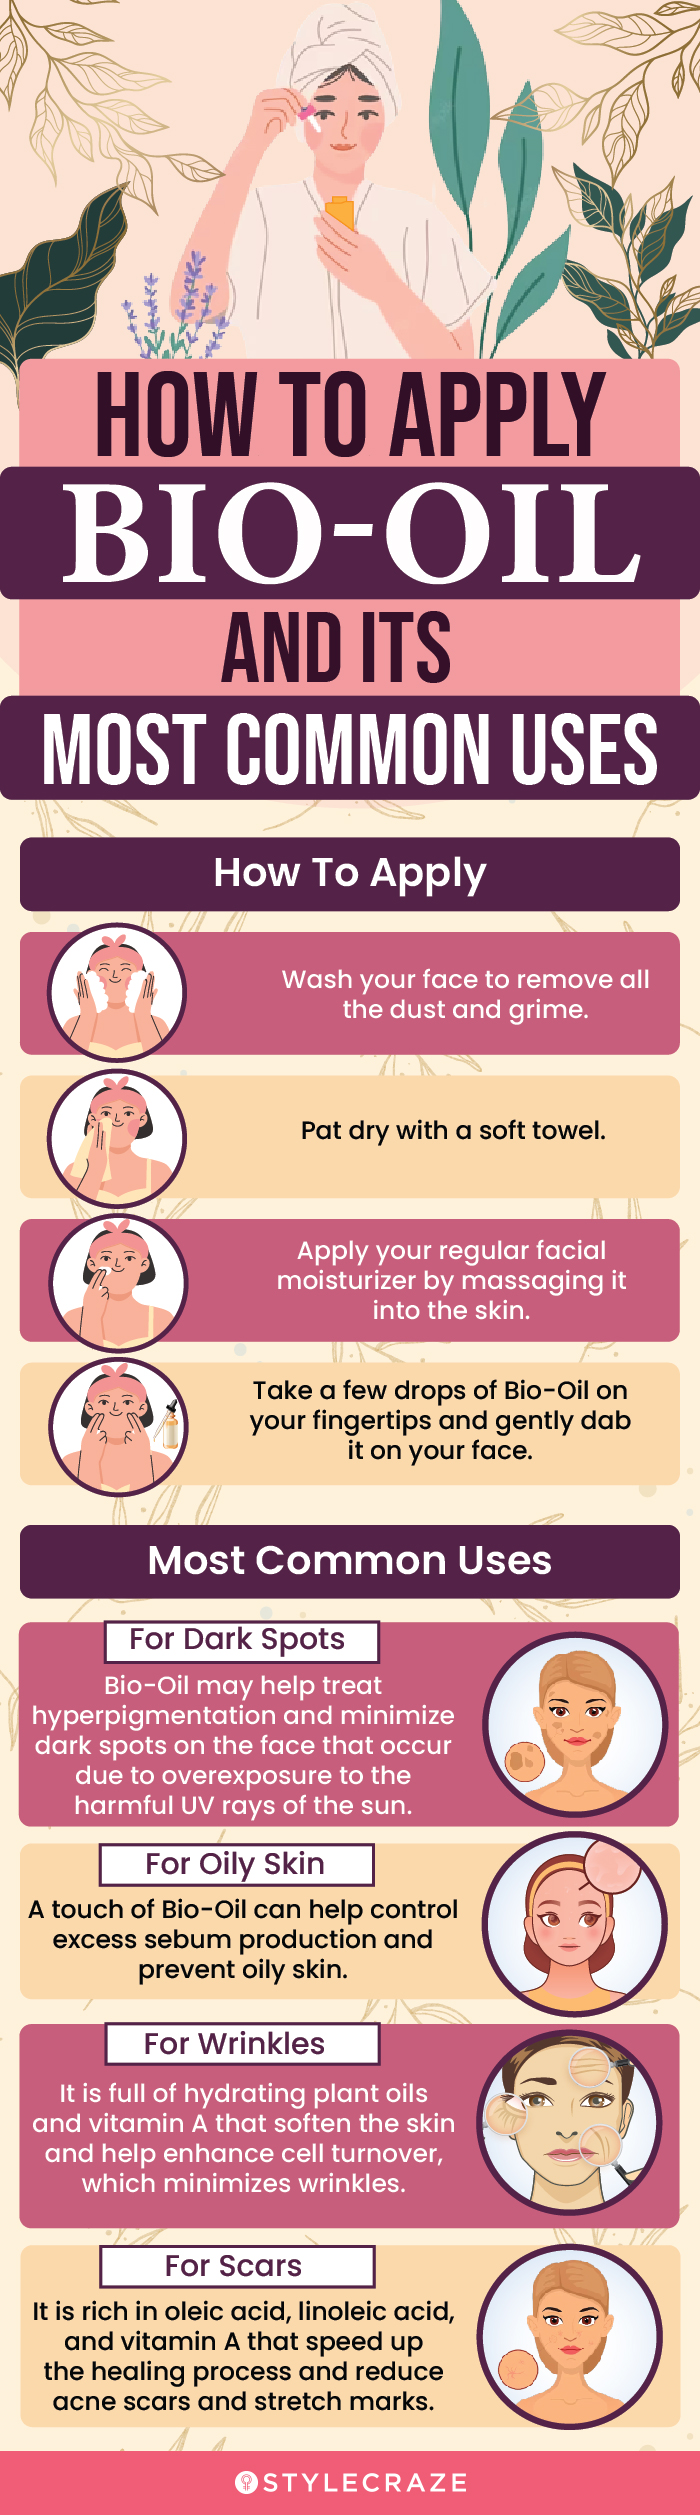 how to apply bio oil and its most common uses (infographic)